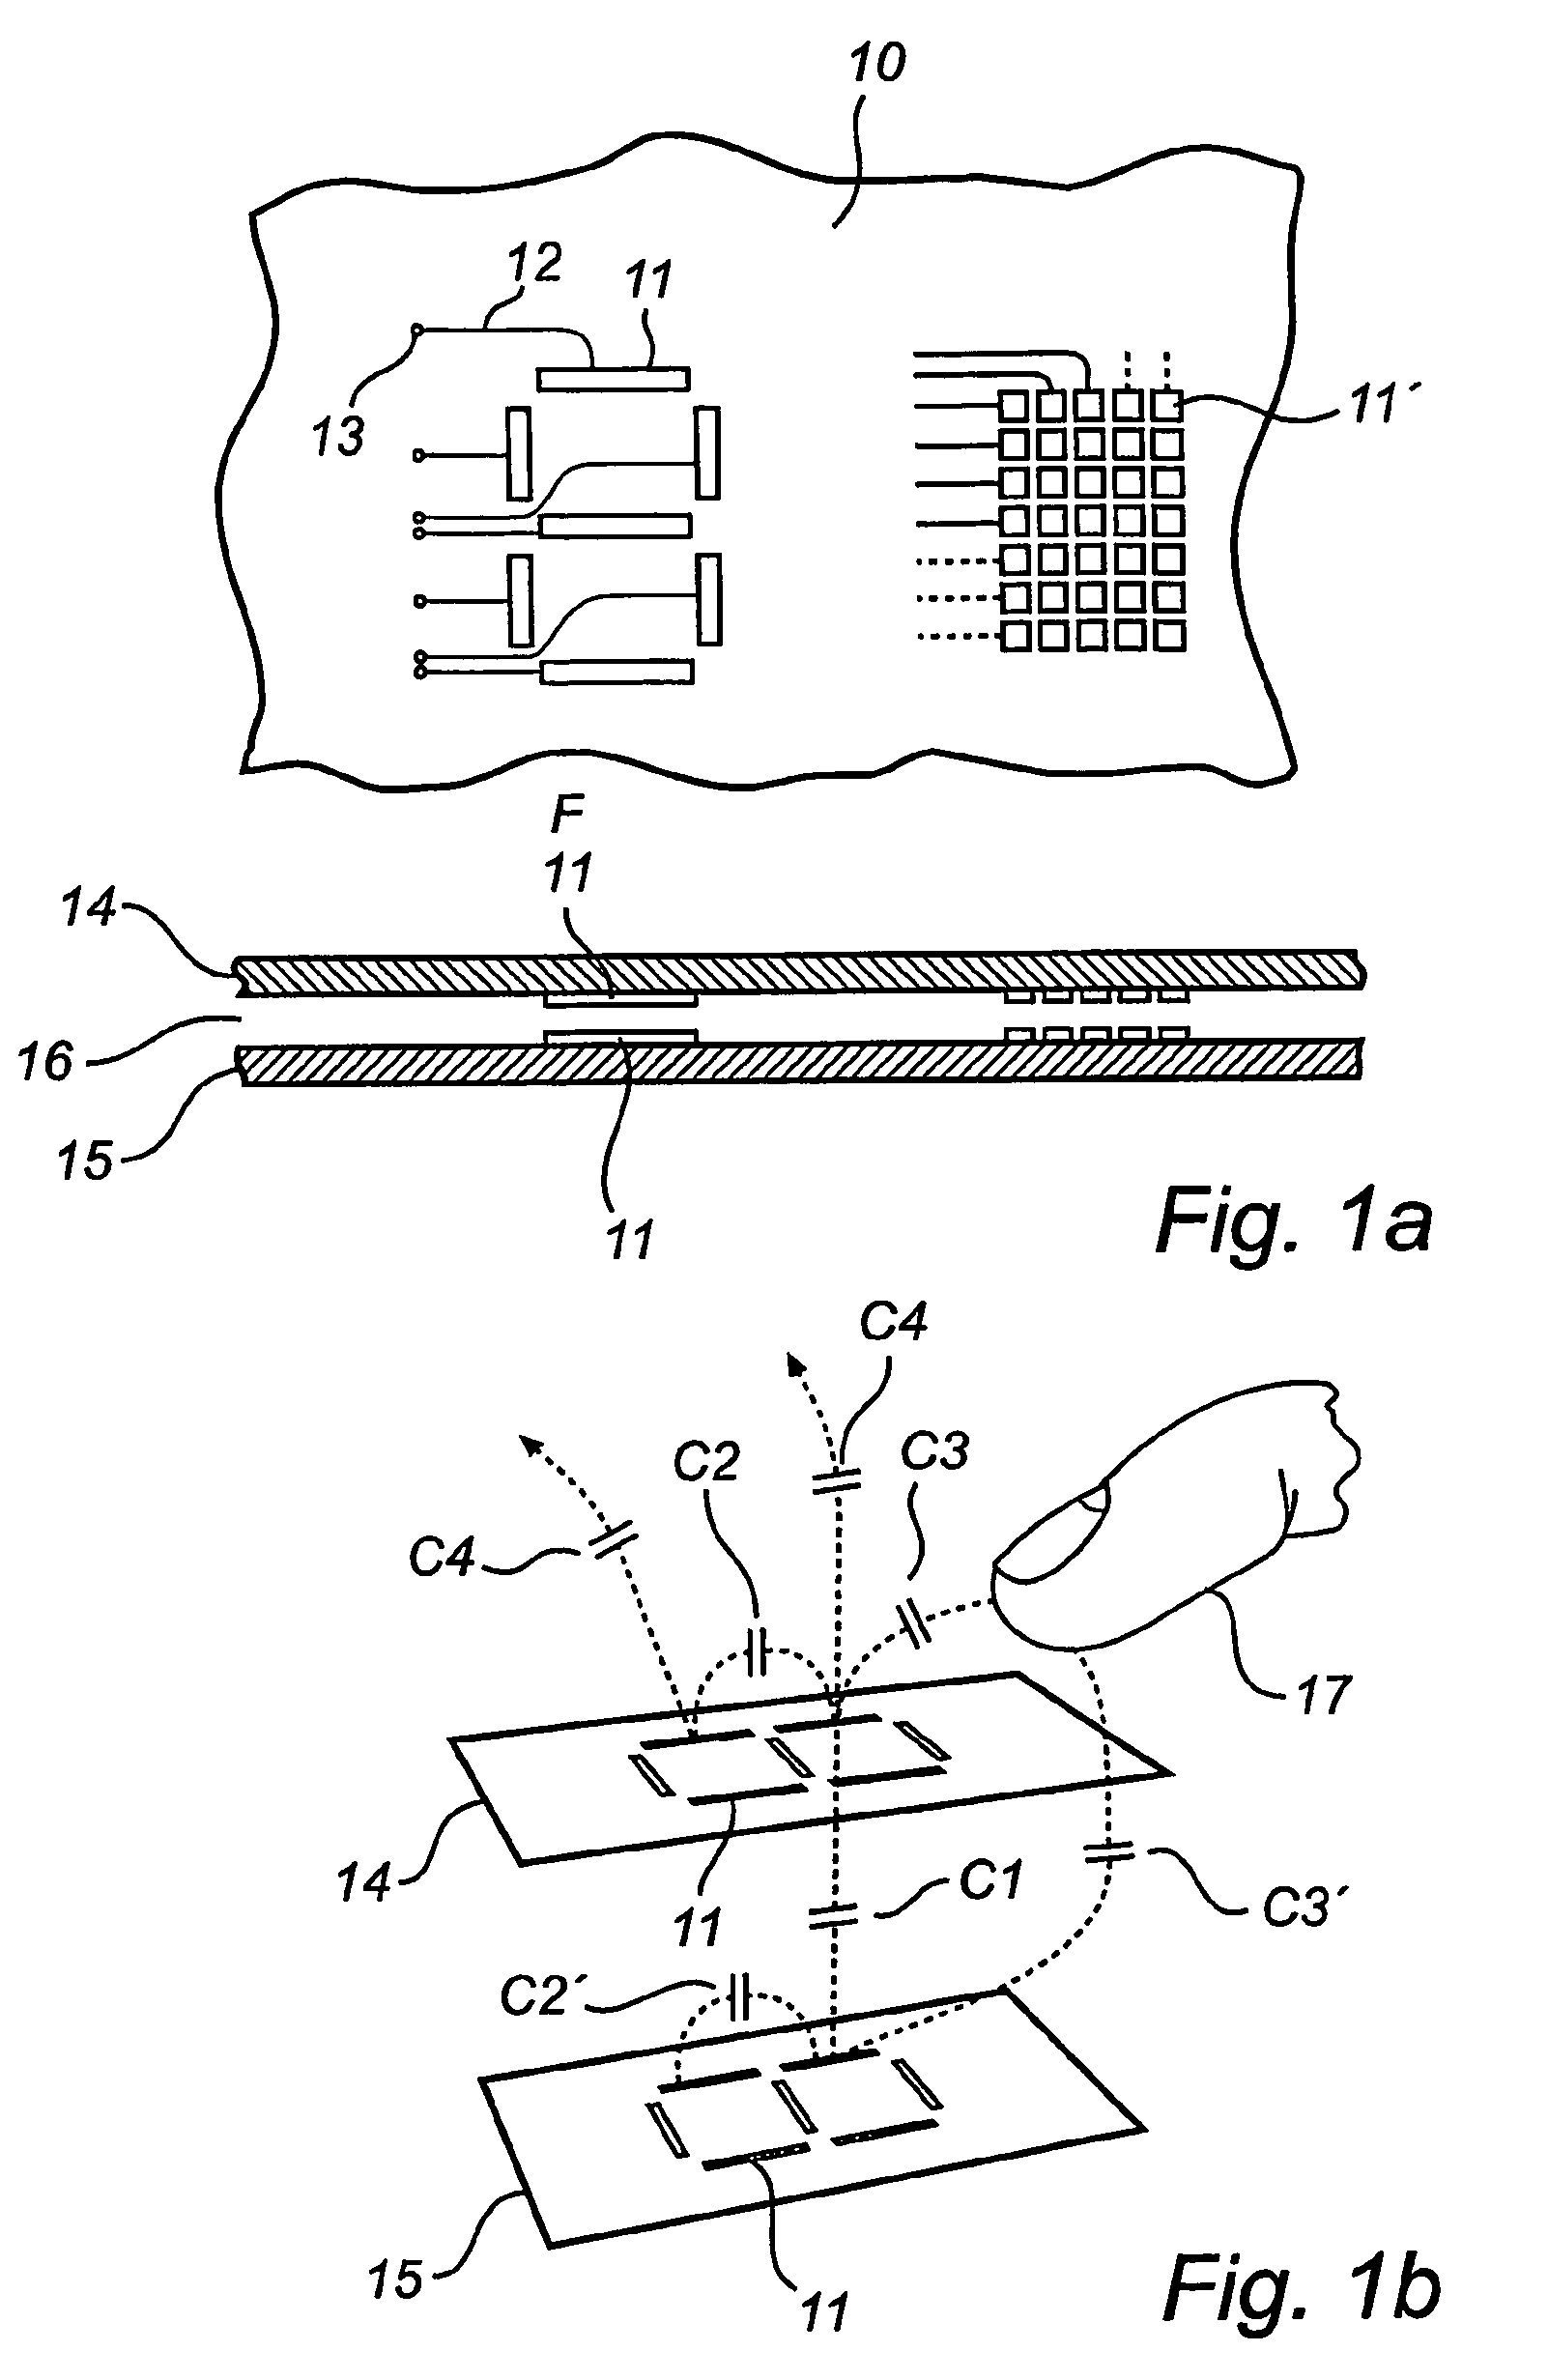 Touch sensitive display device